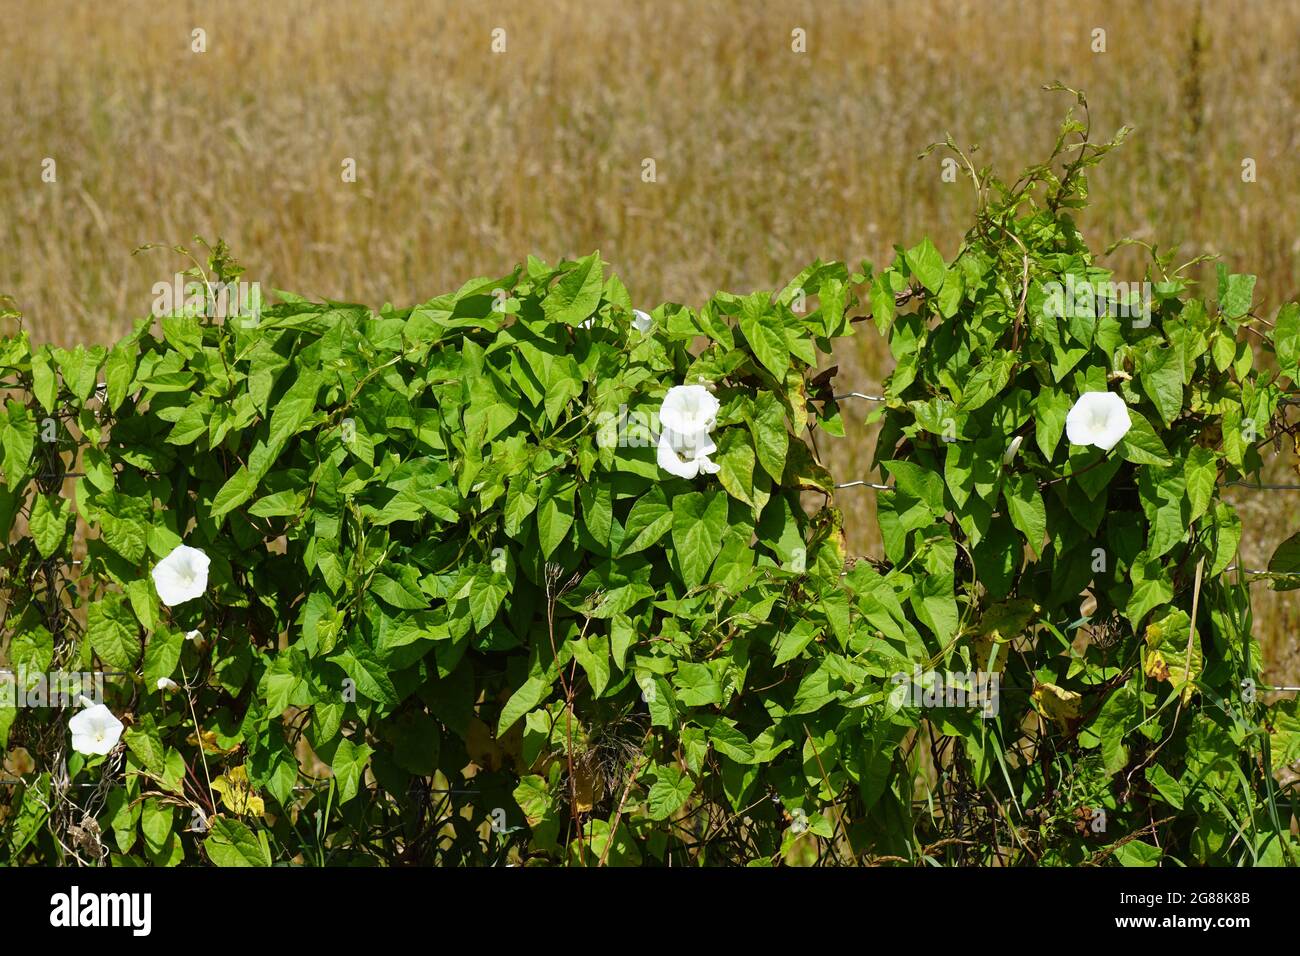 White flowering hedge bindweed (Calystegia sepium) against a fence in the Netherlands. Family Convolvulaceae. Pasture in the background. Stock Photo